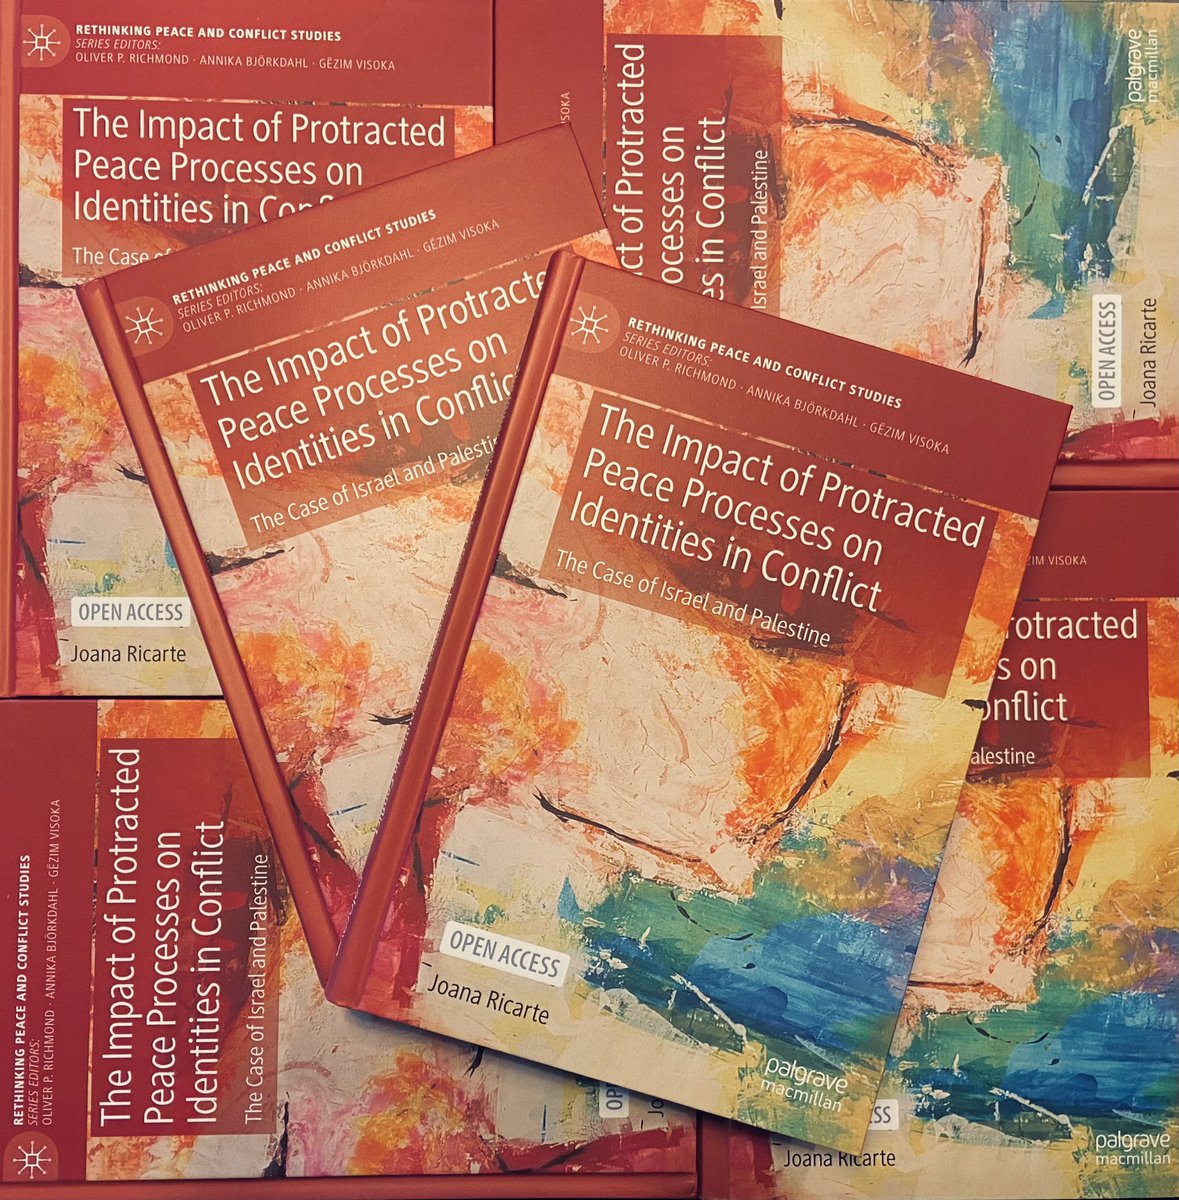 Thrilled to finally see in person the printed copies of my book! 

#openaccess #palgrave #palestine #israel #peaceprocess #peacestudies #dehumanization #reconciliation #protractedconflict